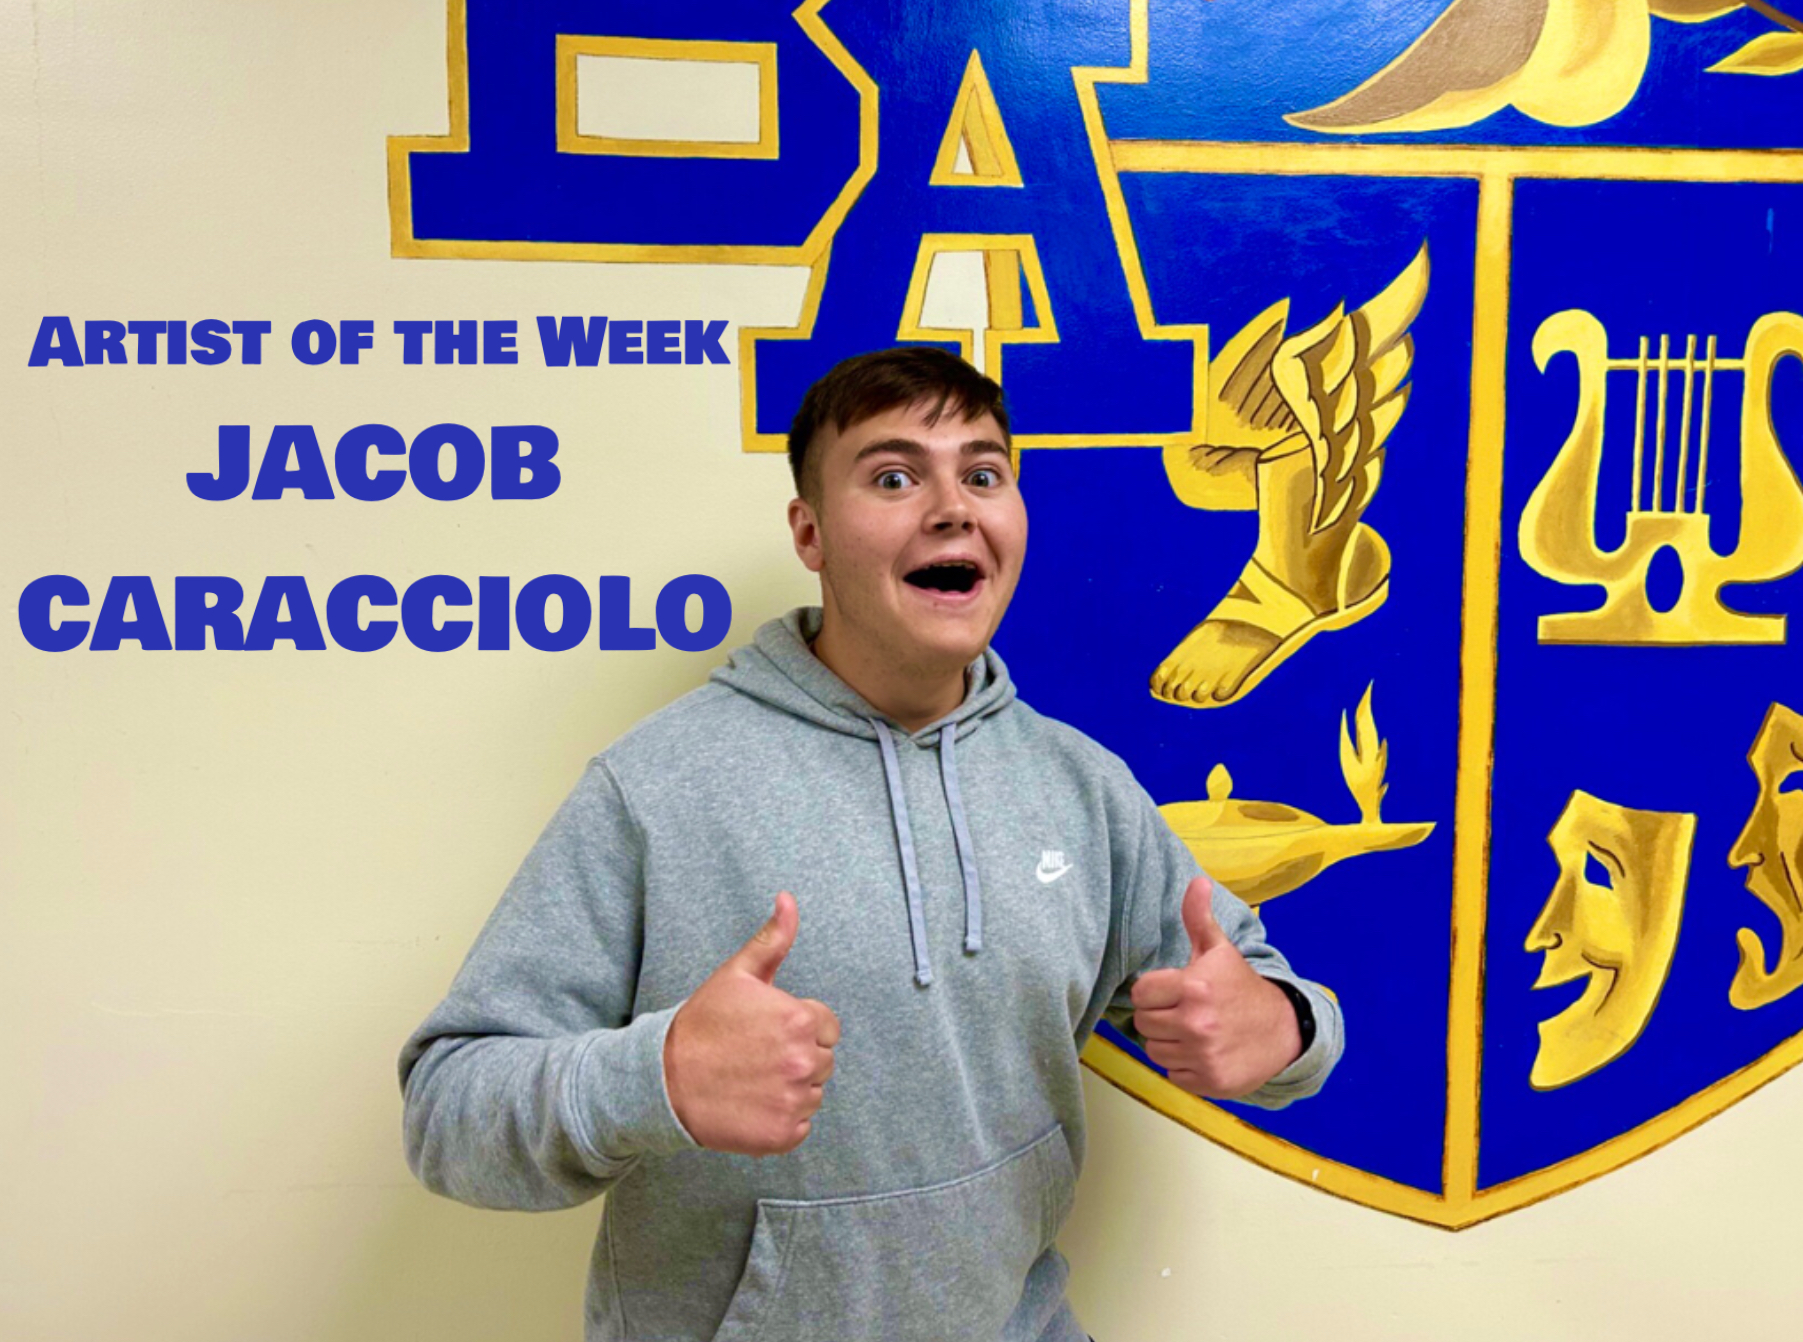 Jacob Caracciolo is the artist of the week for his passion in choir!